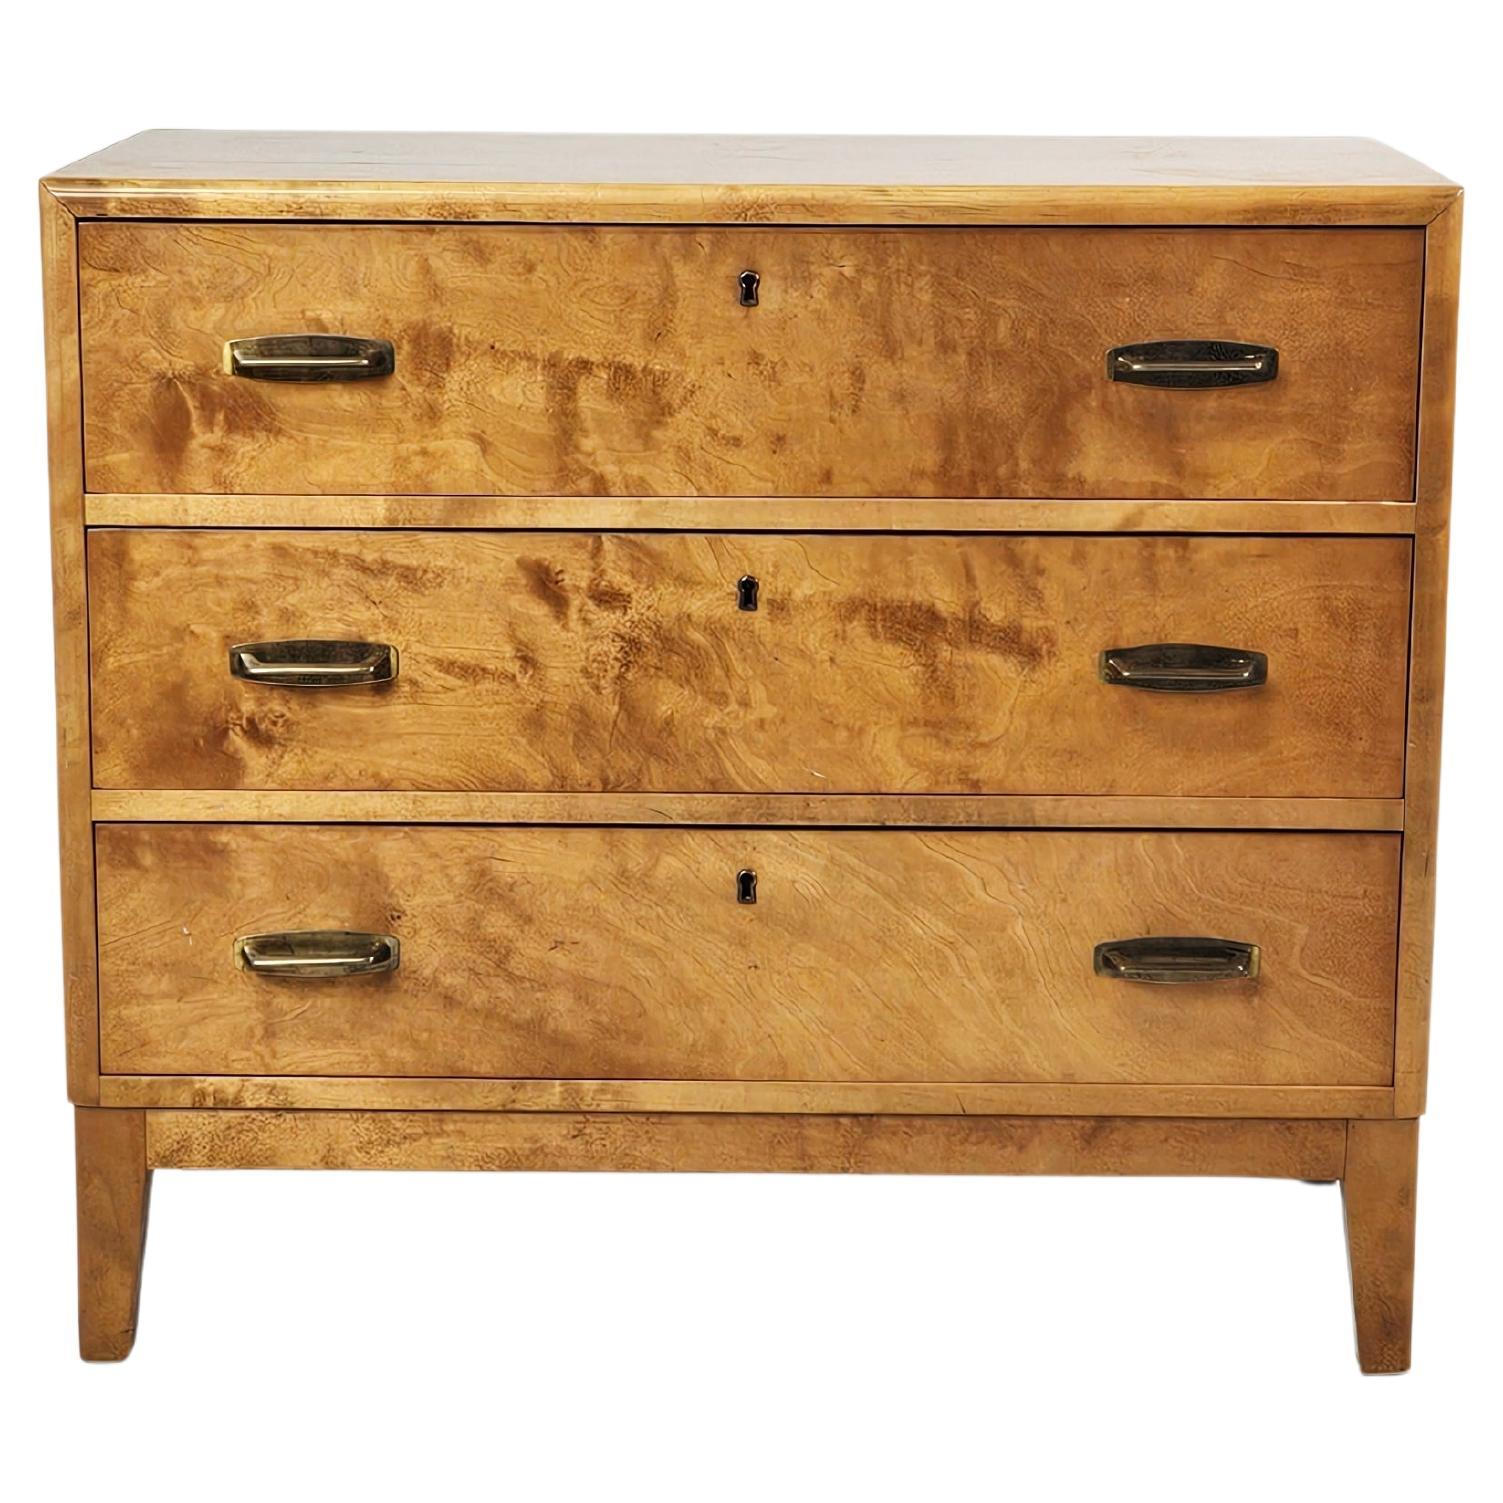 Scandinavian modern chest of drawers, Sweden, 1950s For Sale